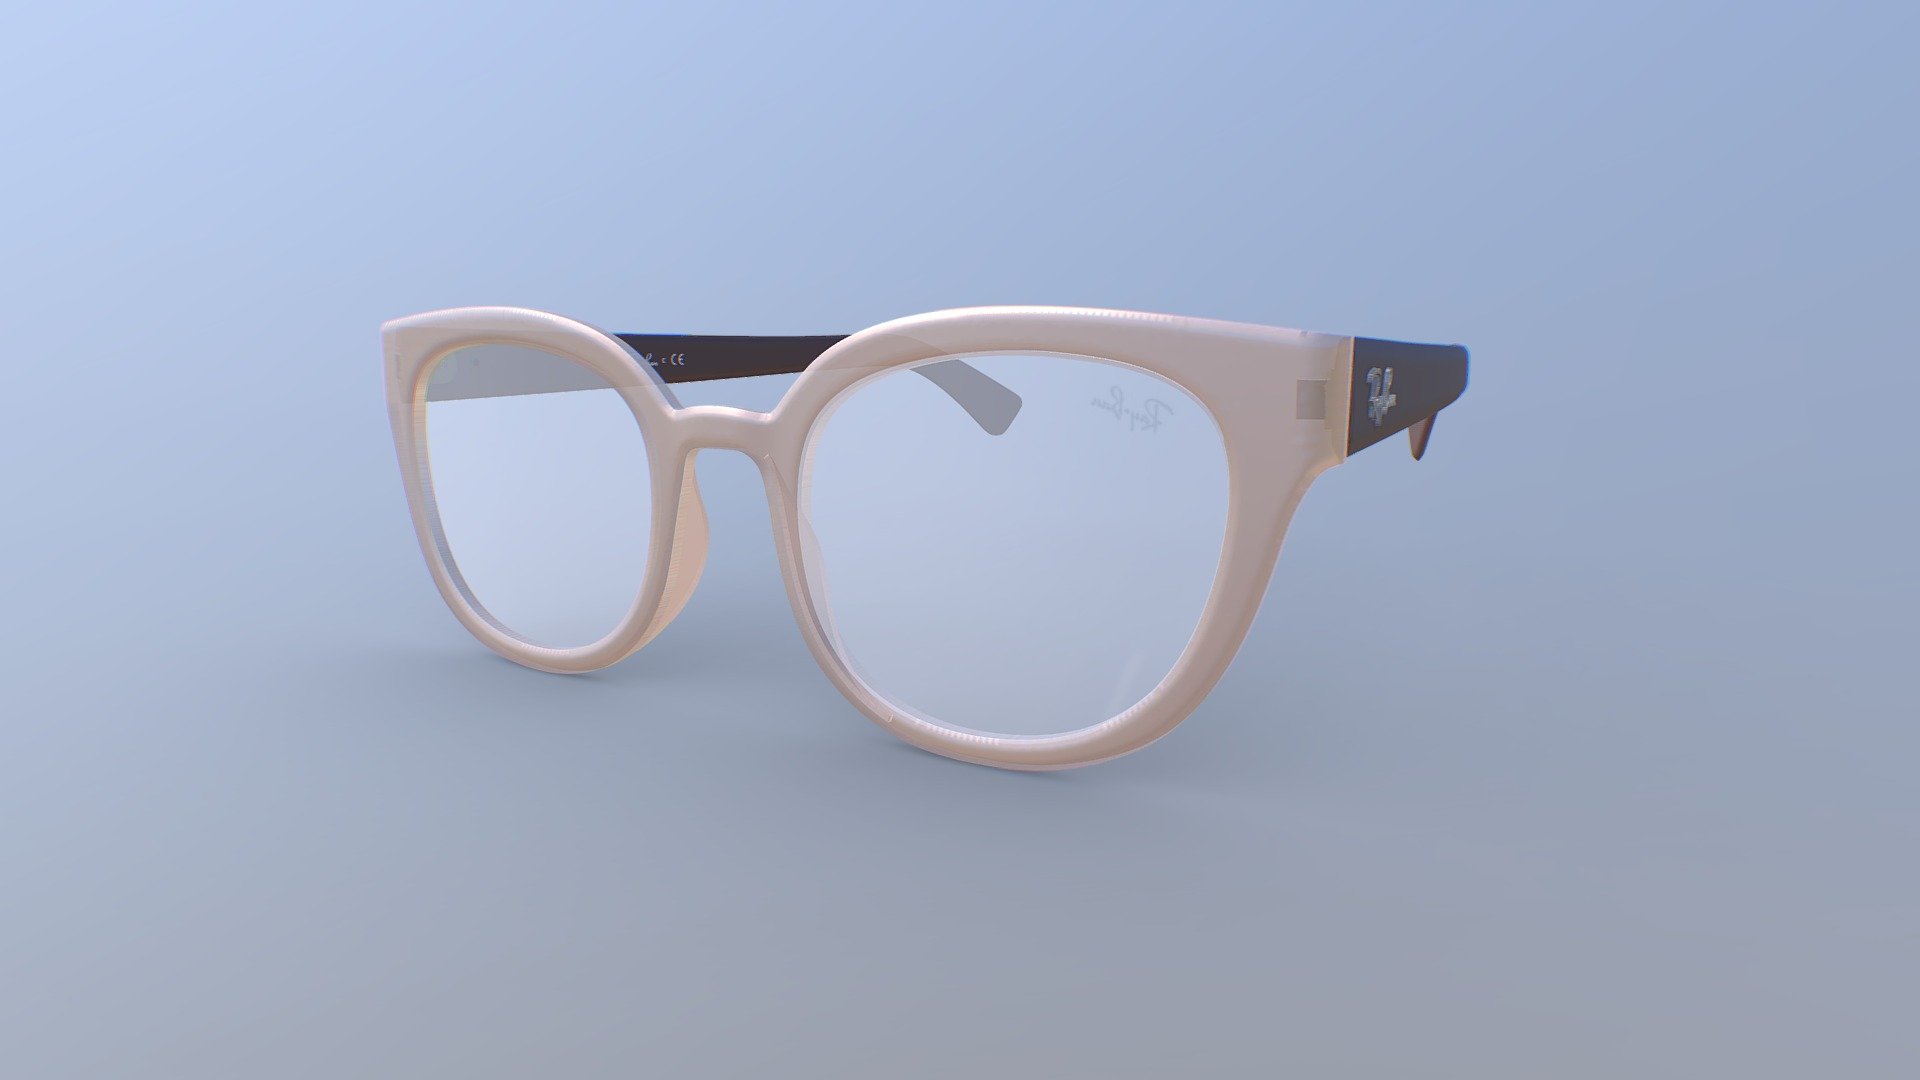 Created with Botcha3D, https://botcha3d.com

Timeless eyeglasses from Ray-Ban with nylon frame. Pairs form and function to create truly stylish specs. The squared acetate model is available in different color options, from classic to colorfull contrasting havana frame and bi-layer temples in vivid colors 3d model